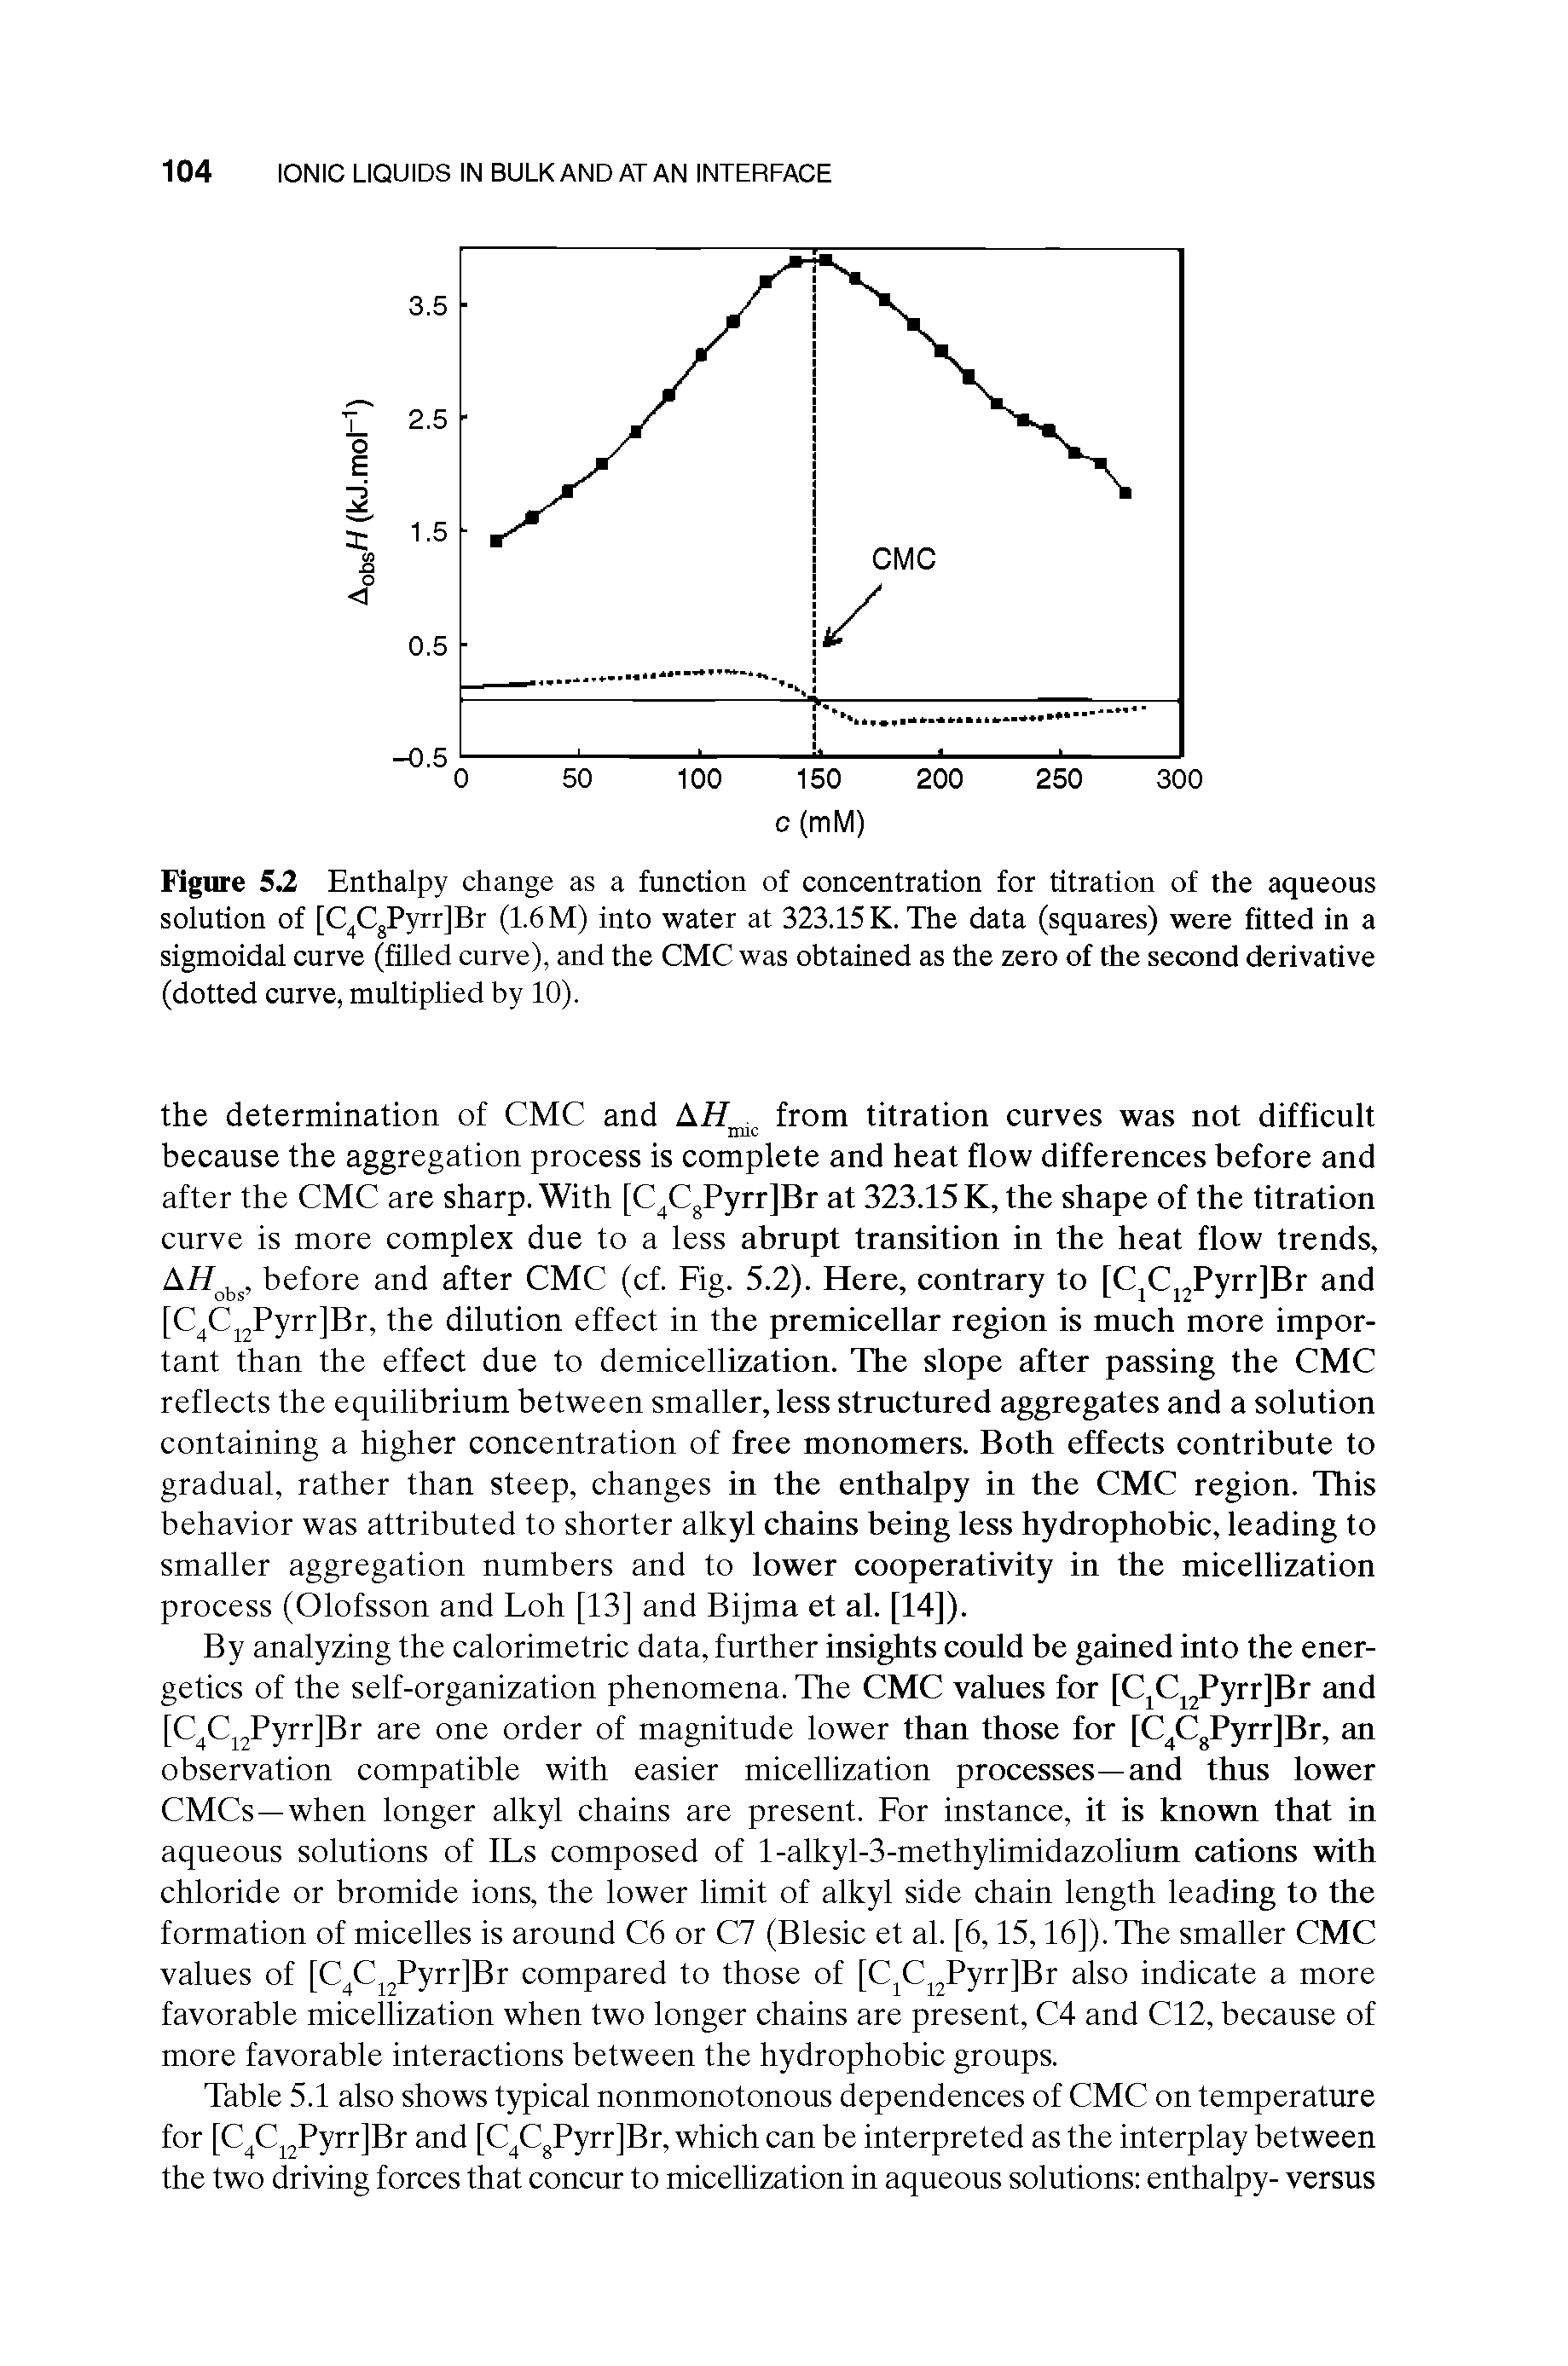 Figure S2 Enthalpy change as a function of concentration for titration of the aqueous solution of [C CgPyrrJBr (1.6 M) into water at 323.15 K. The data (squares) were fitted in a sigmoidal curve (filled curve), and the CMC was obtained as the zero of the second derivative (dotted curve, multiplied by 10).